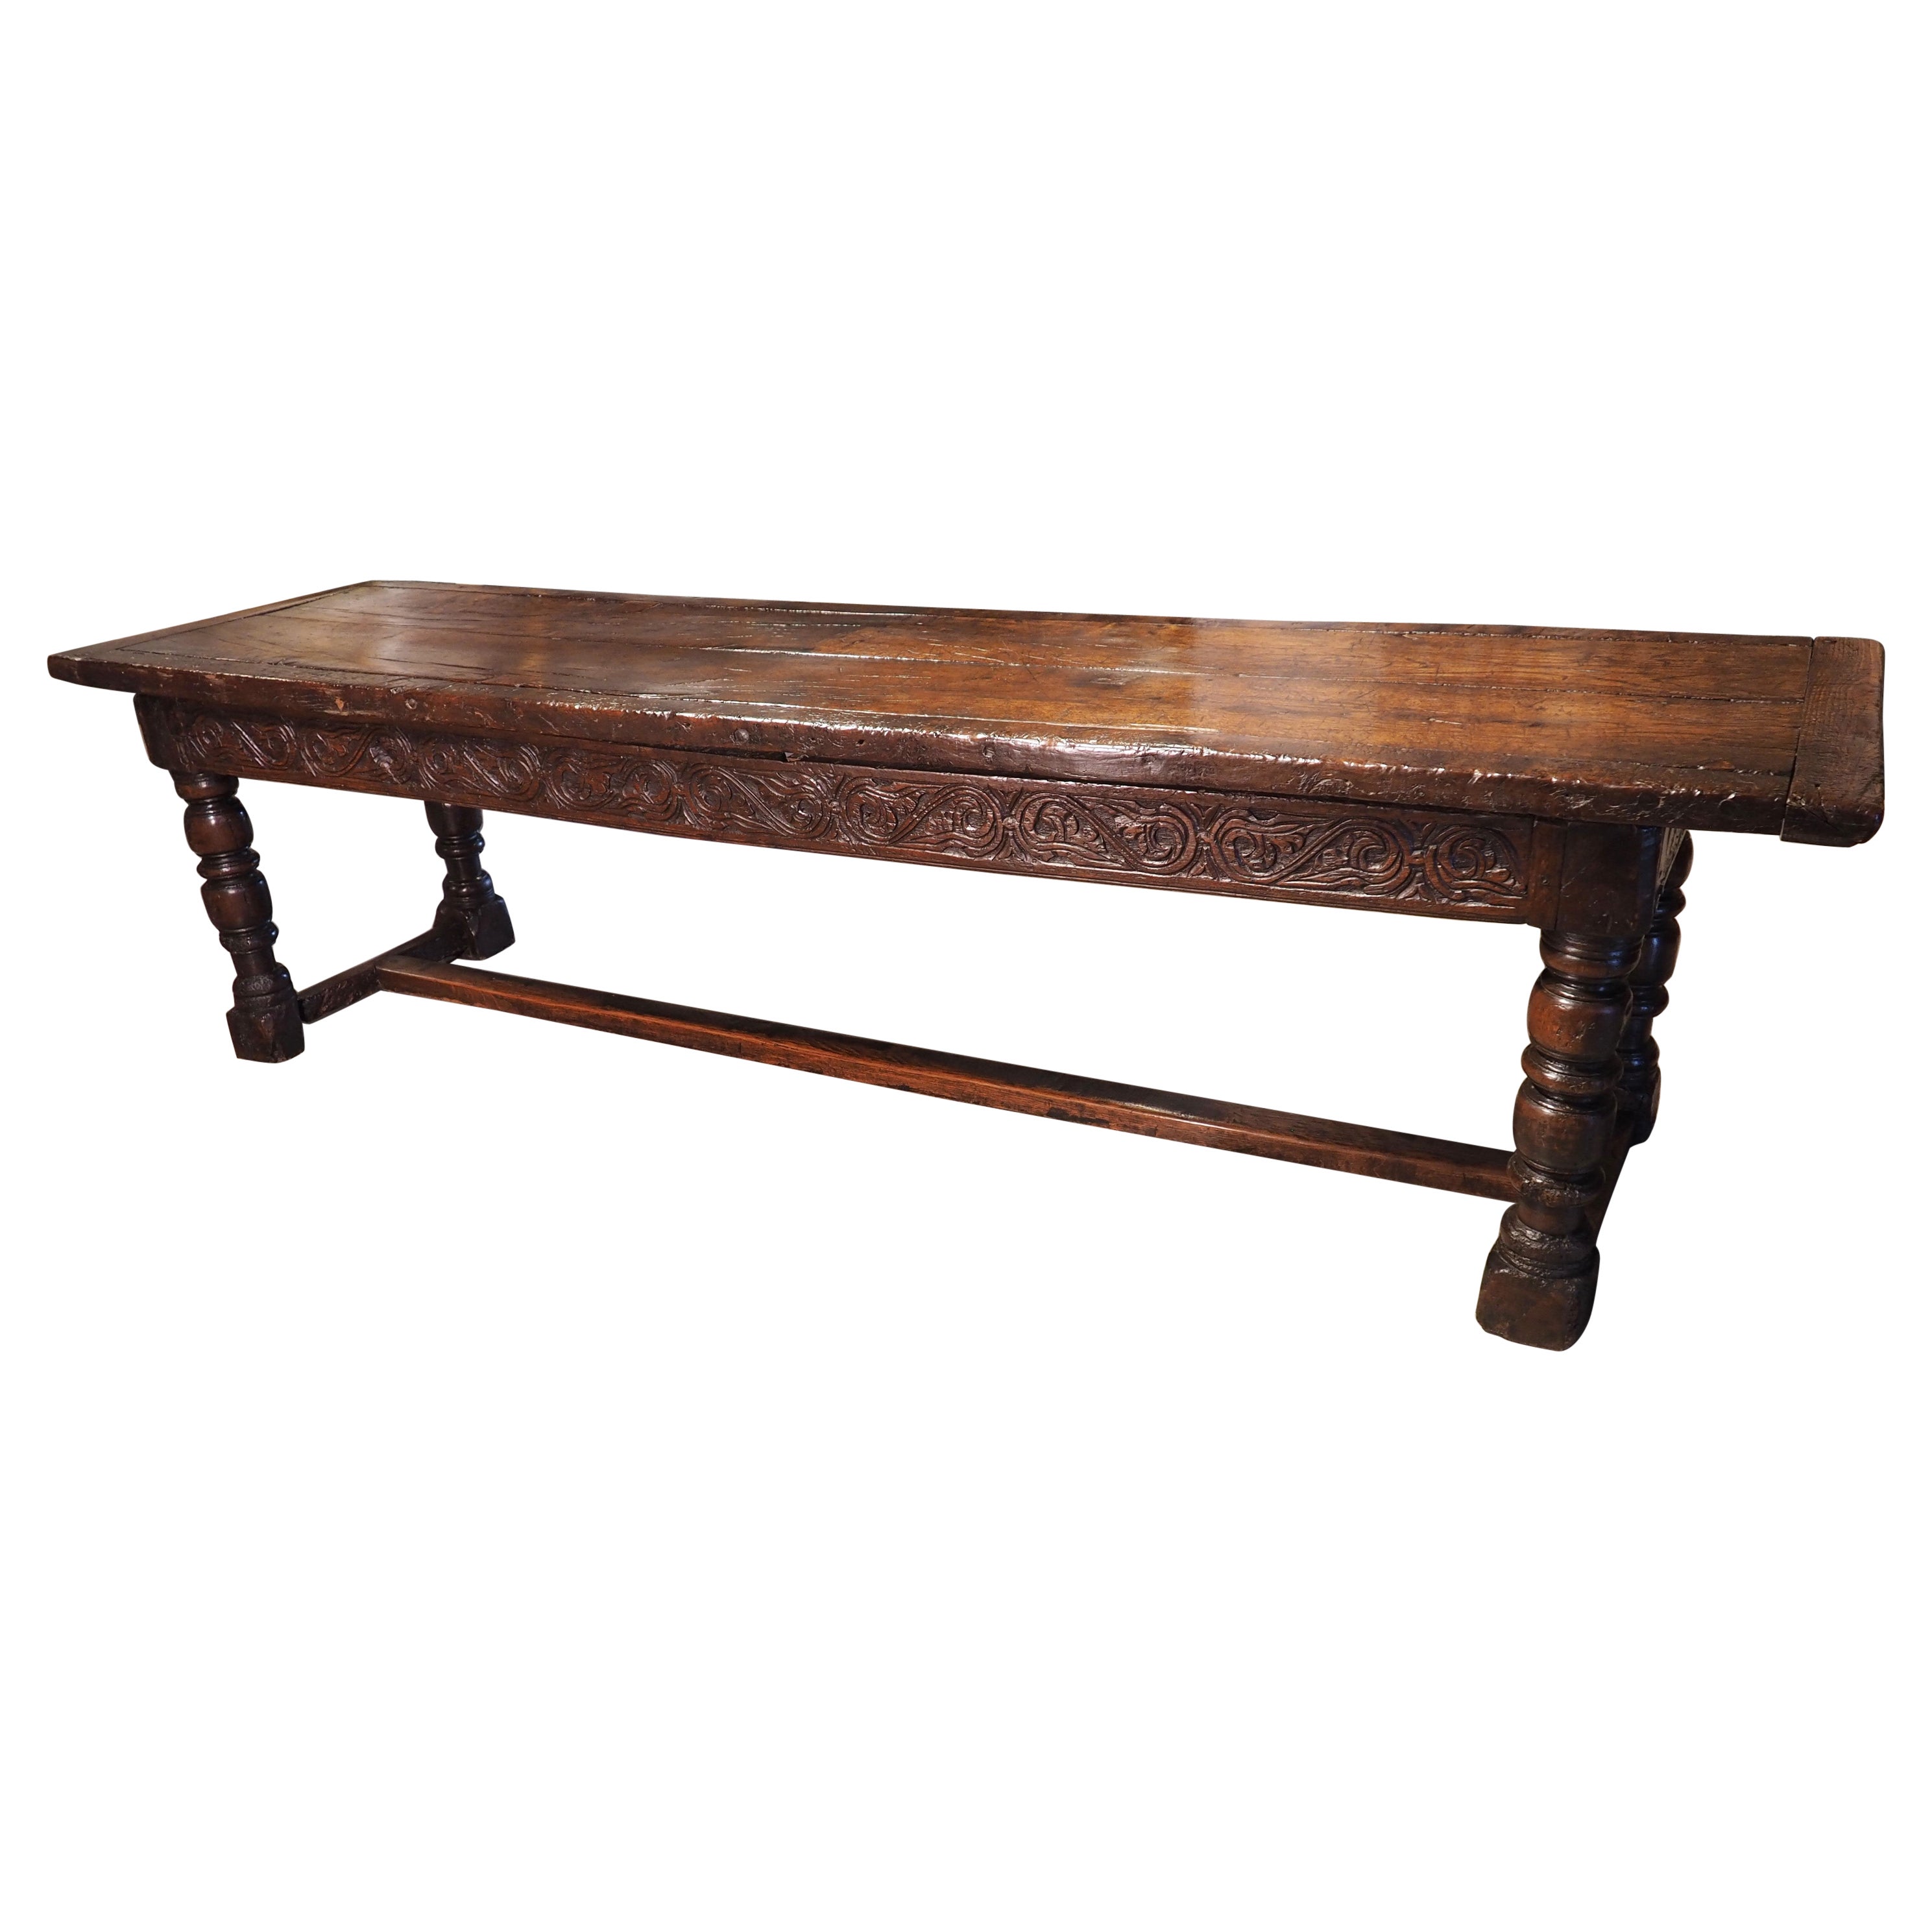 A Long 17th Century Carved Oak Baluster Leg Table from Flanders For Sale